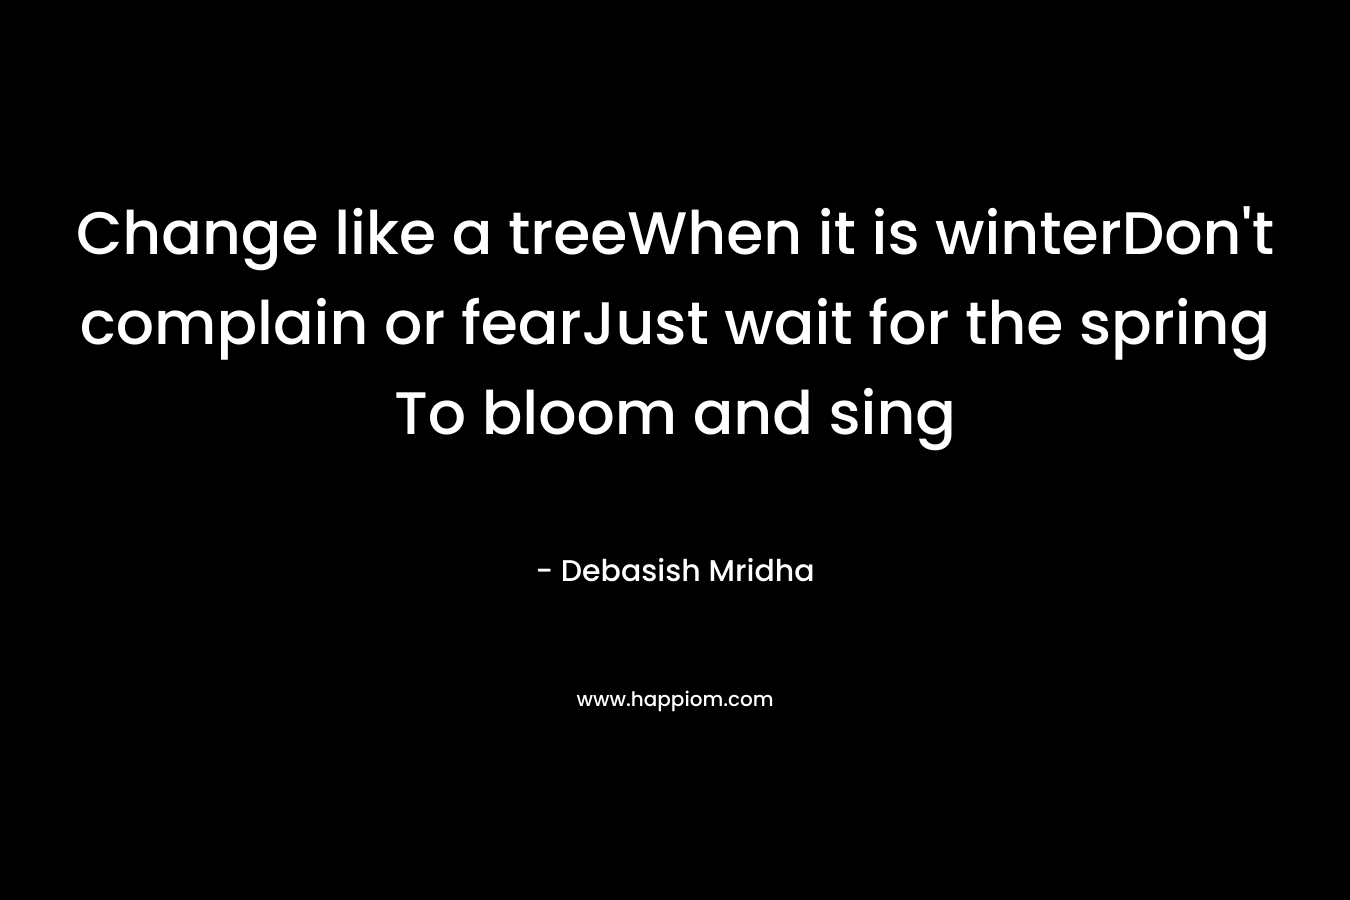 Change like a treeWhen it is winterDon't complain or fearJust wait for the spring To bloom and sing